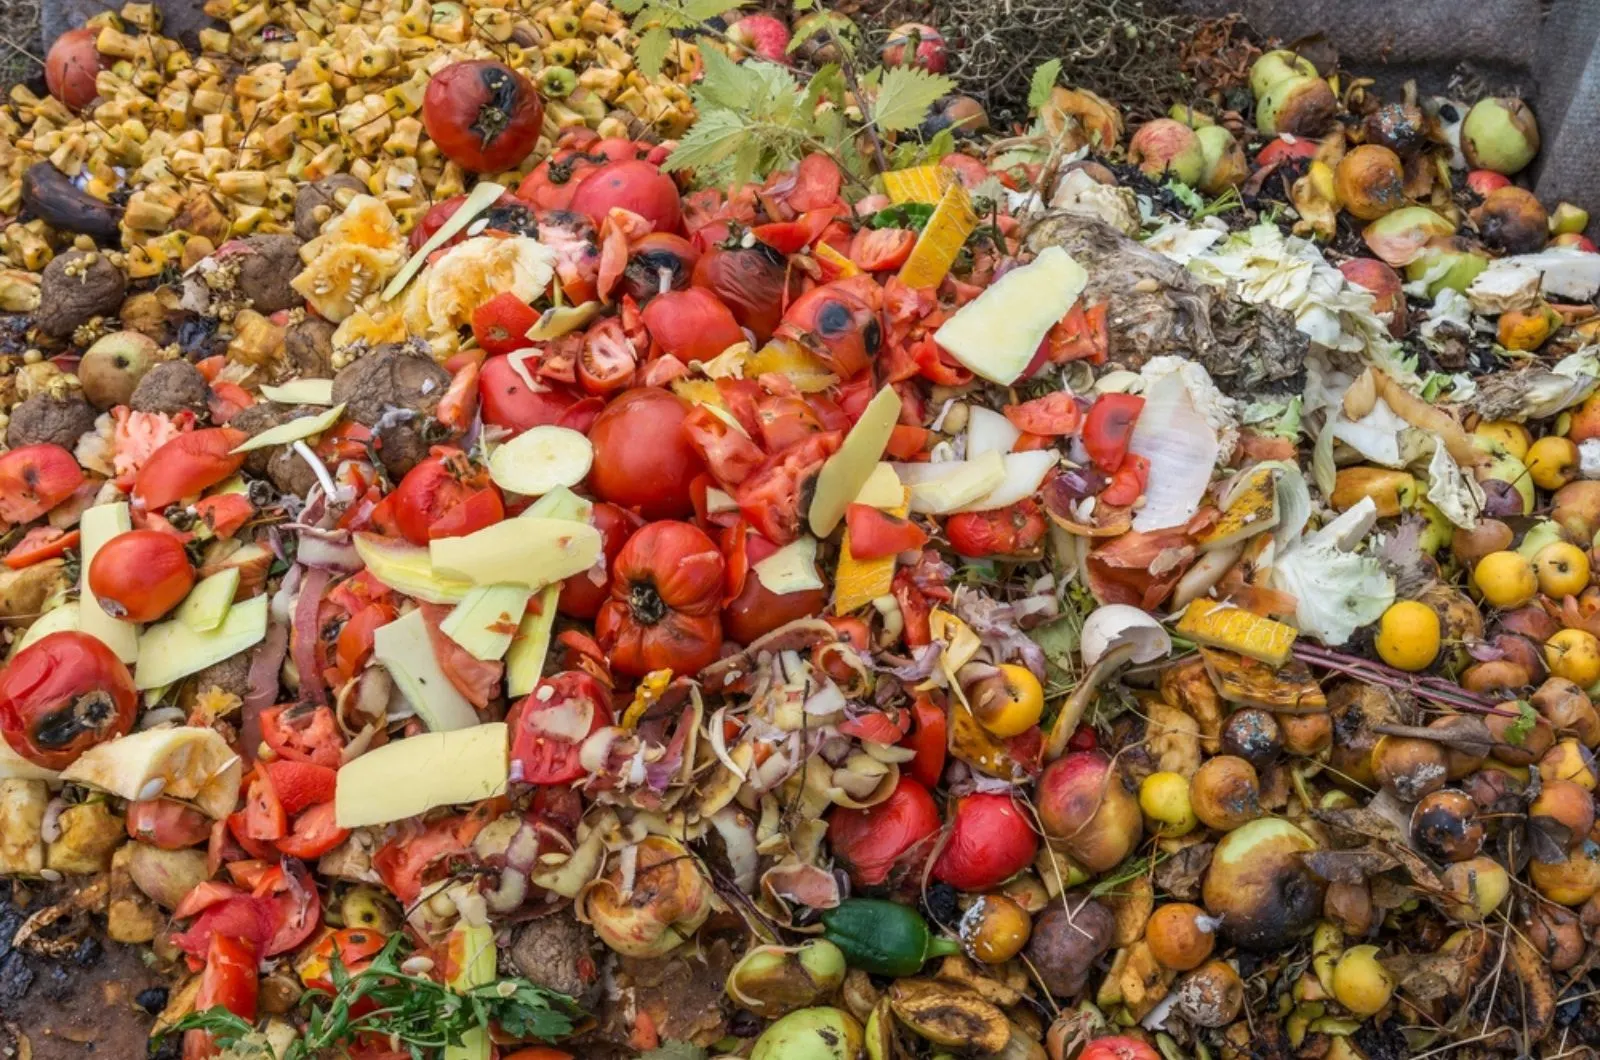 Waste of vegetables and fruits in a compost heap